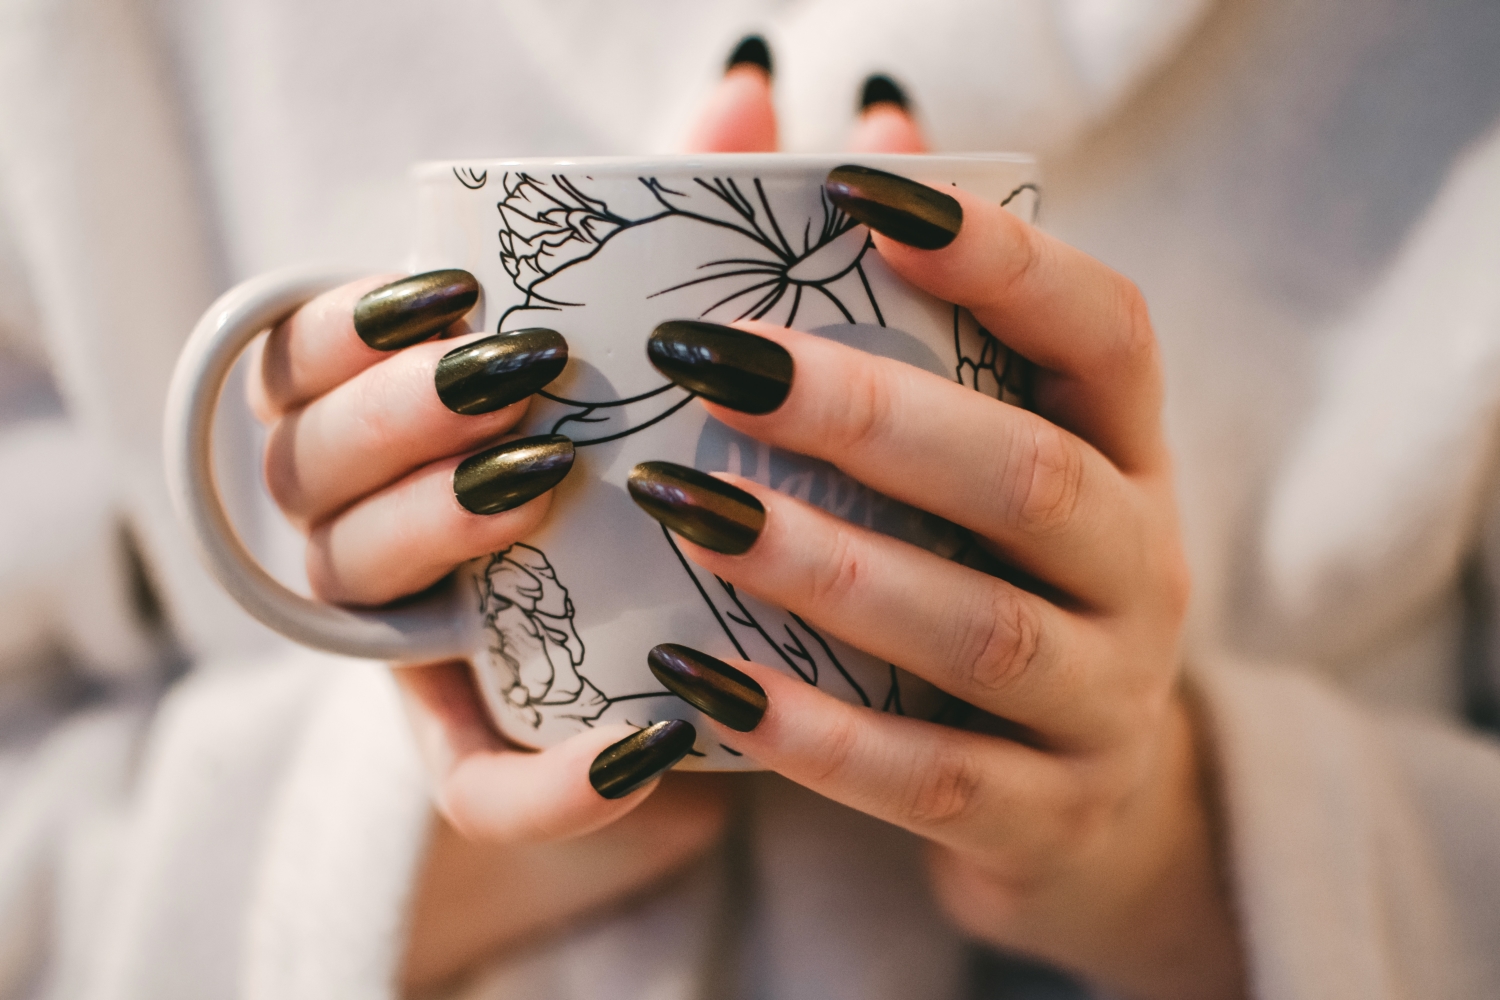 care your nails need | Nail care procedure